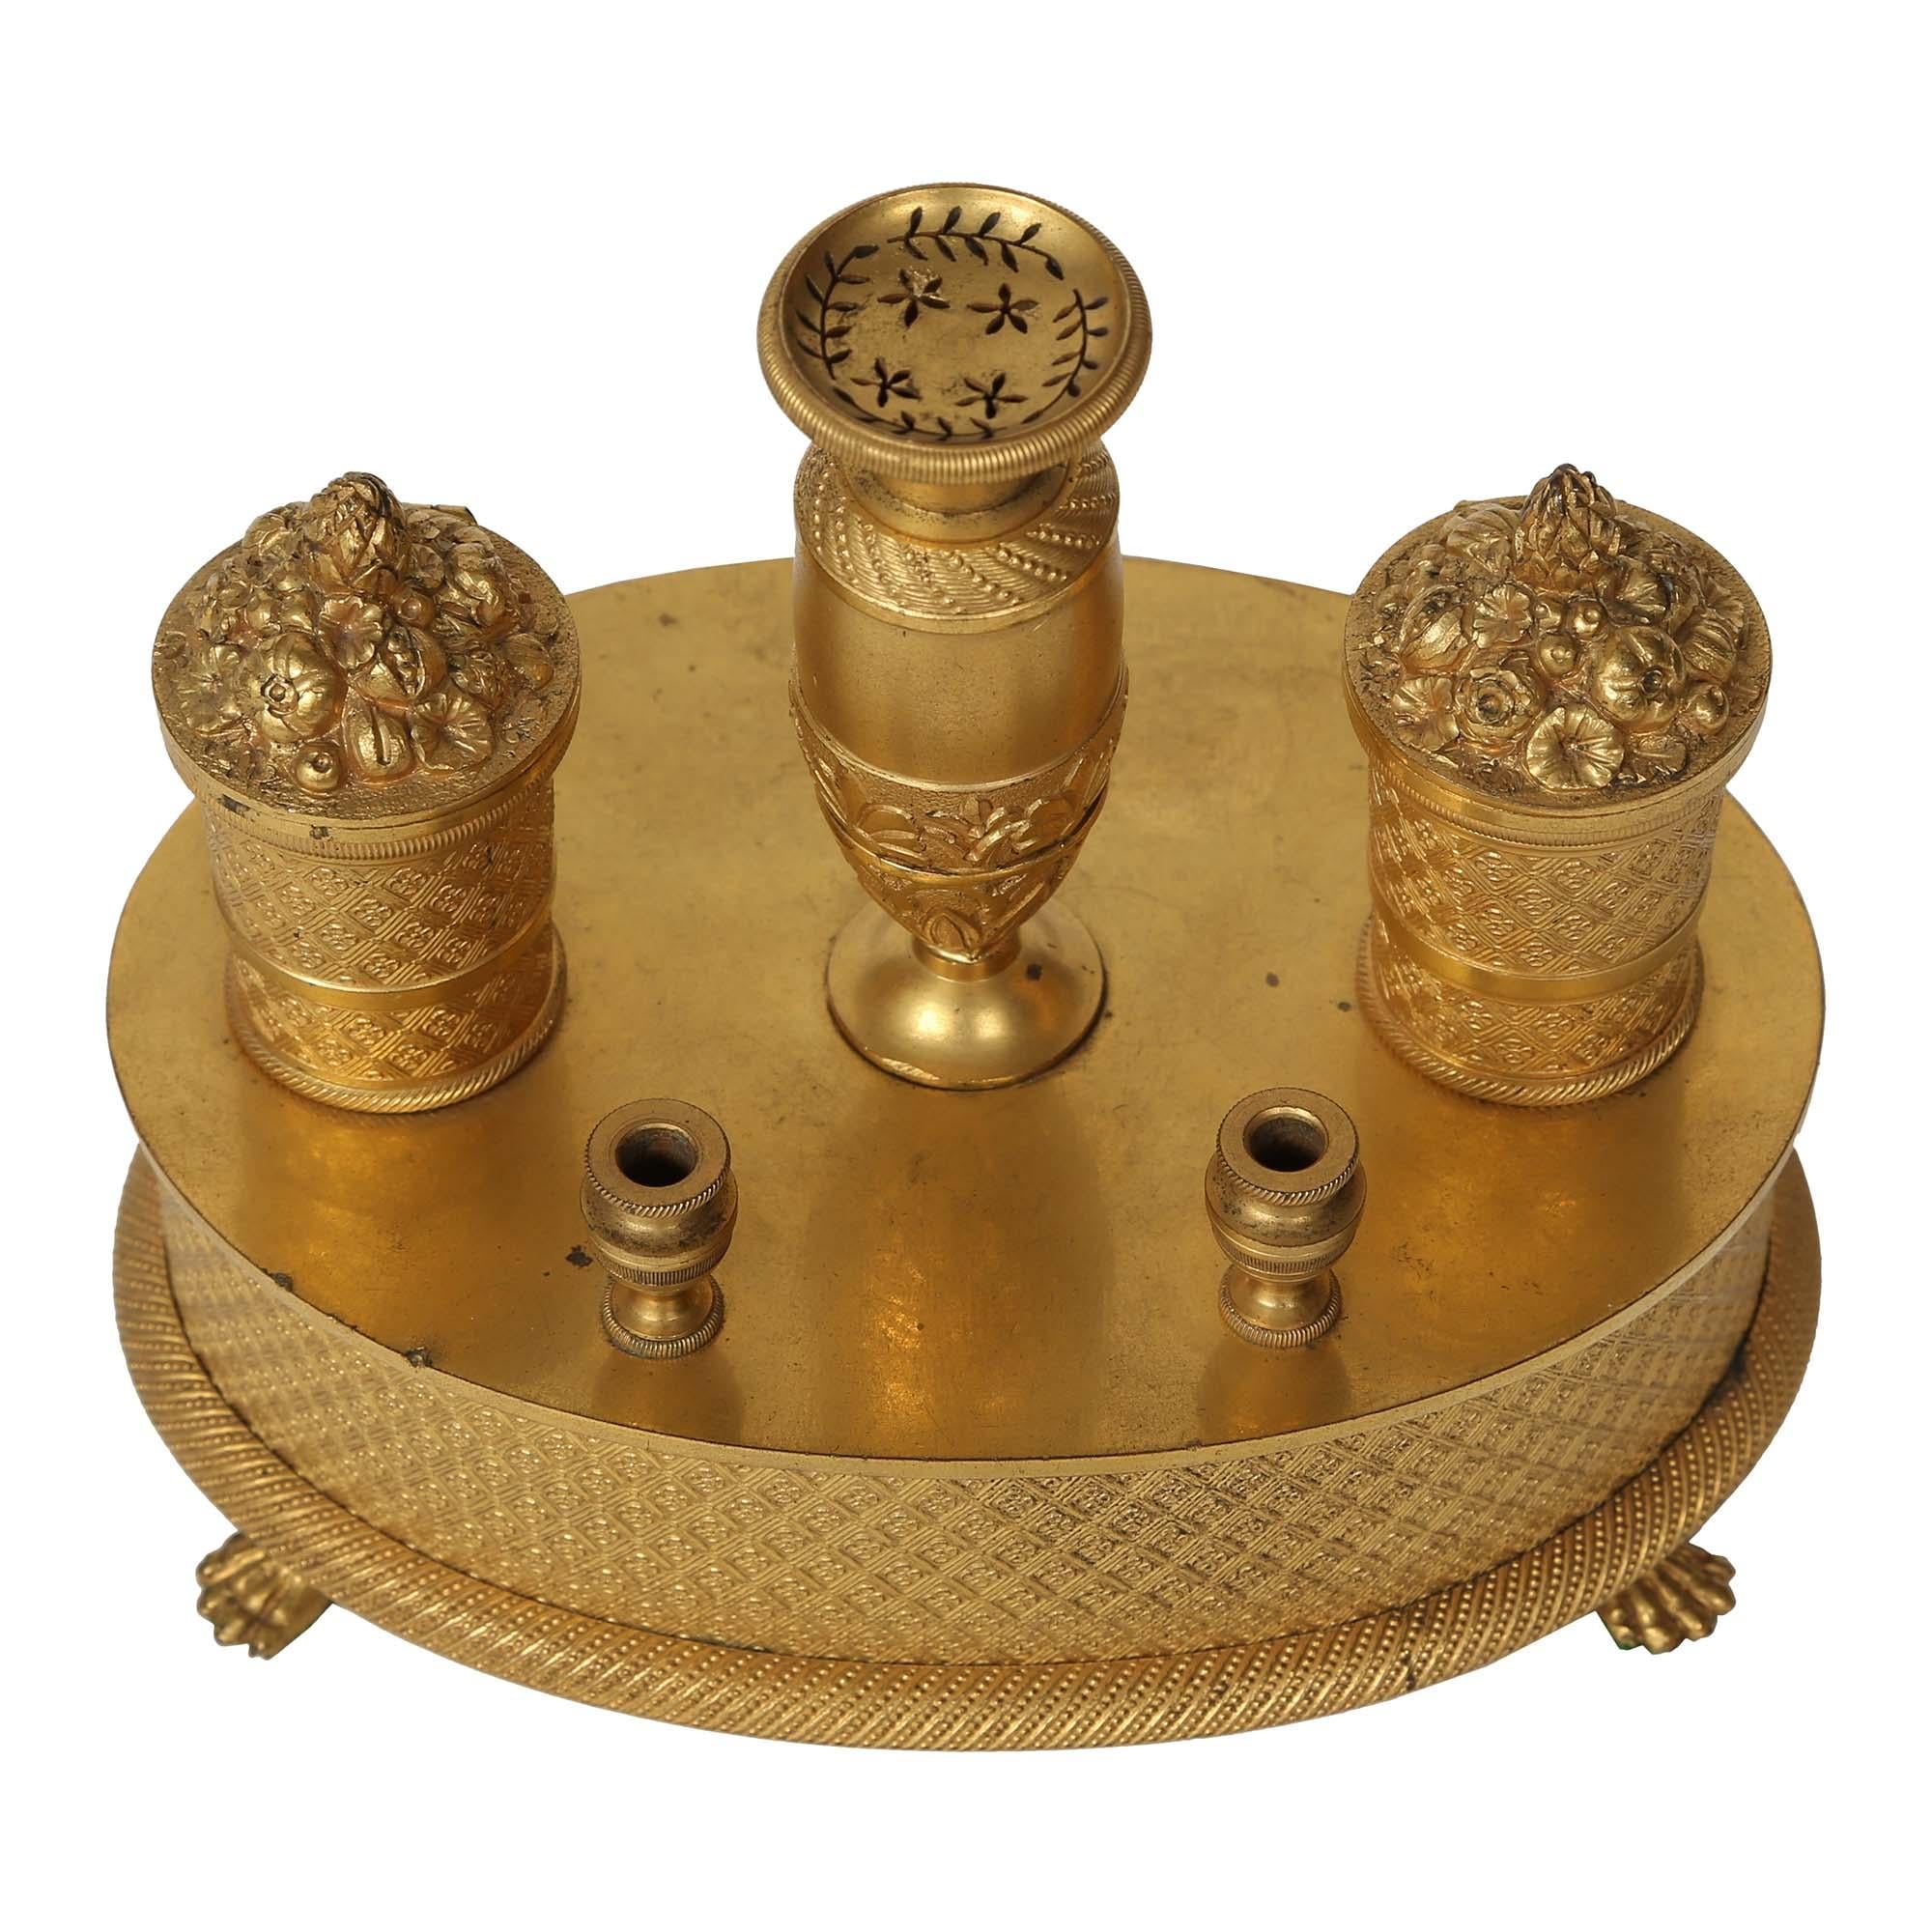 An exquisite French 19th century Empire st. oval ormolu inkwell. The inkwell is raised by pawed feet below a lattice design with rosettes in the center. Above are two ink dispensers with lids in the shape of flower and fruit baskets. At the center